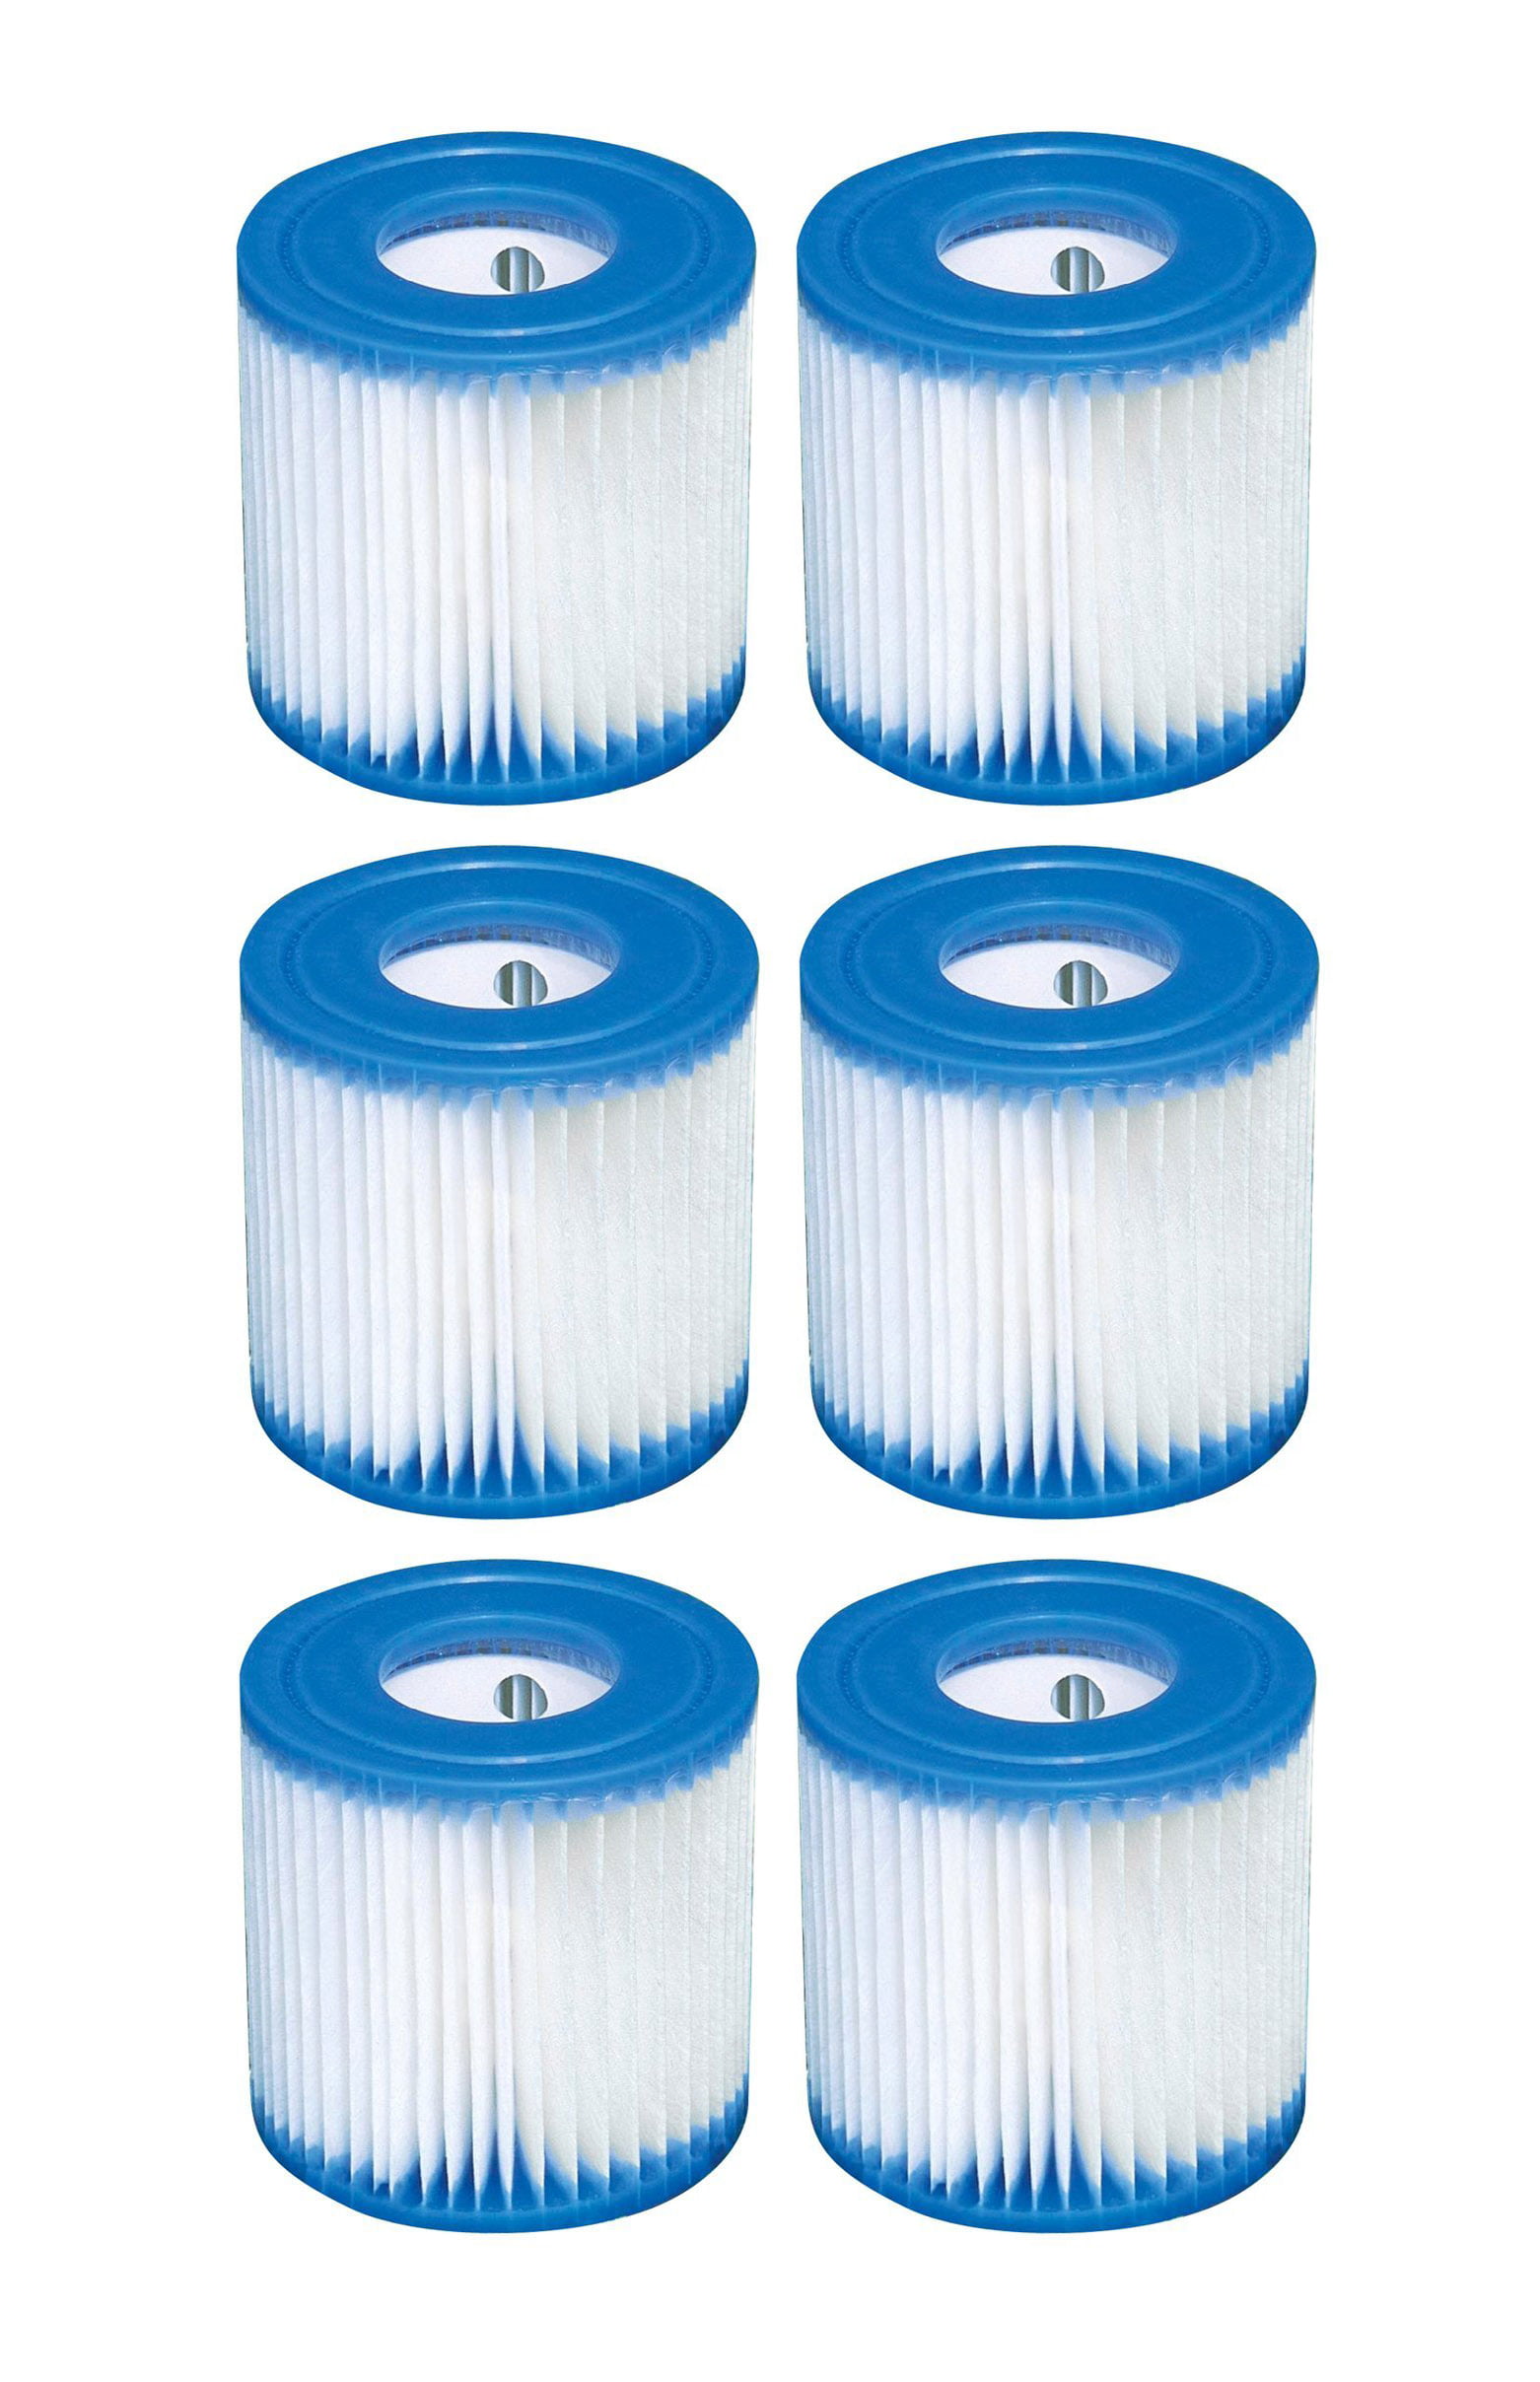 Intex Type A Filter Cartridge for Pools-4 Pack 